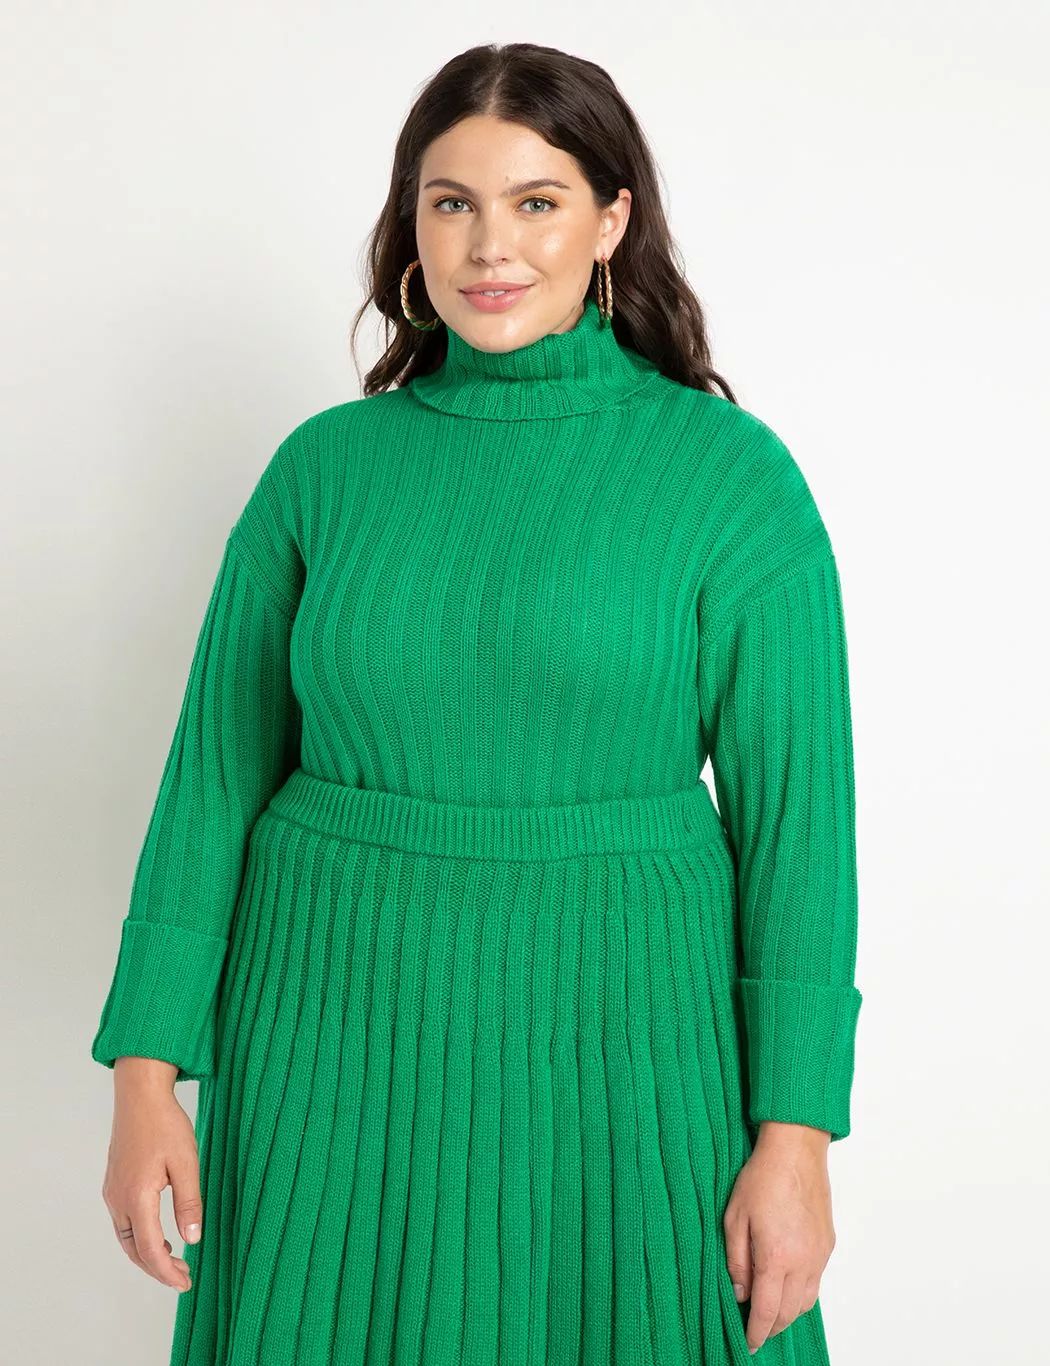 Cropped Turtleneck With Roll Cuff | Women's Plus Size Tops | ELOQUII | Eloquii